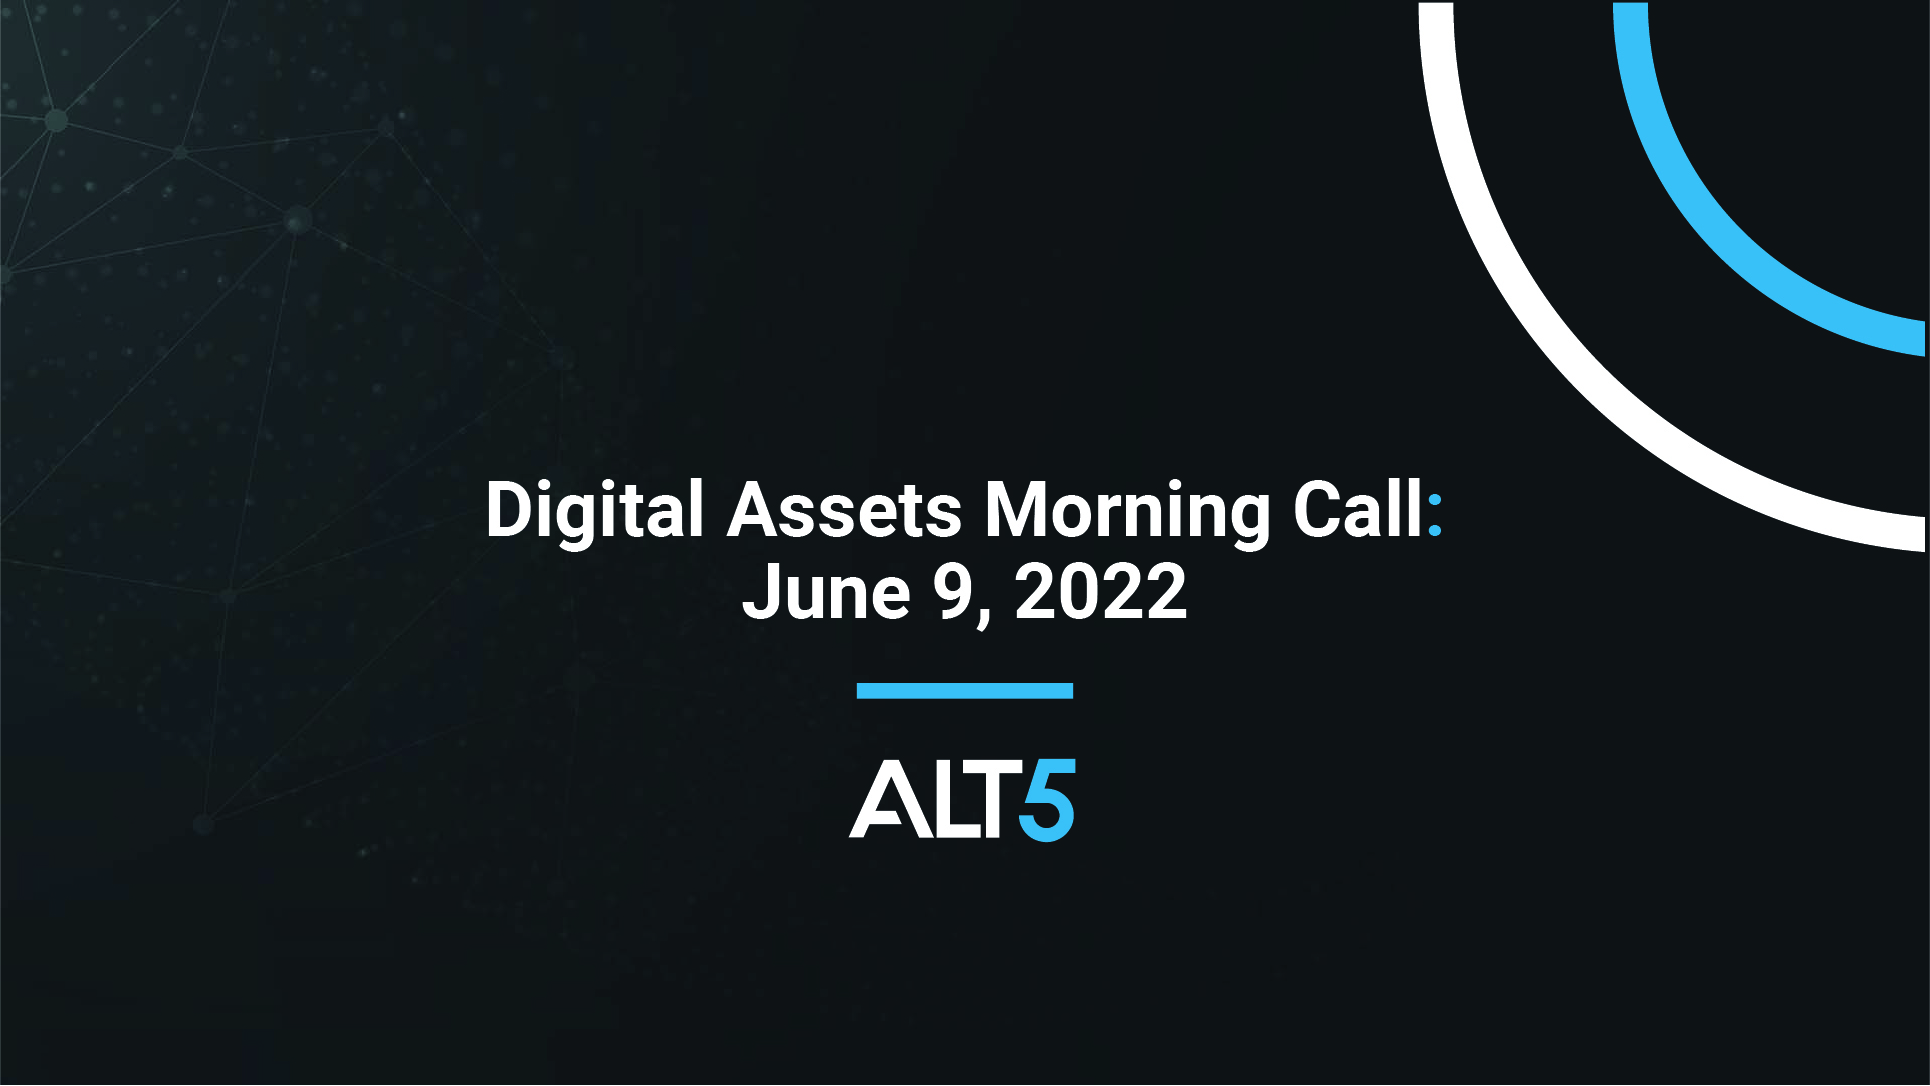 Digital Assets Morning Call: June 9 2022 - Crypto token technicals take more focus; Central bank tightening continues